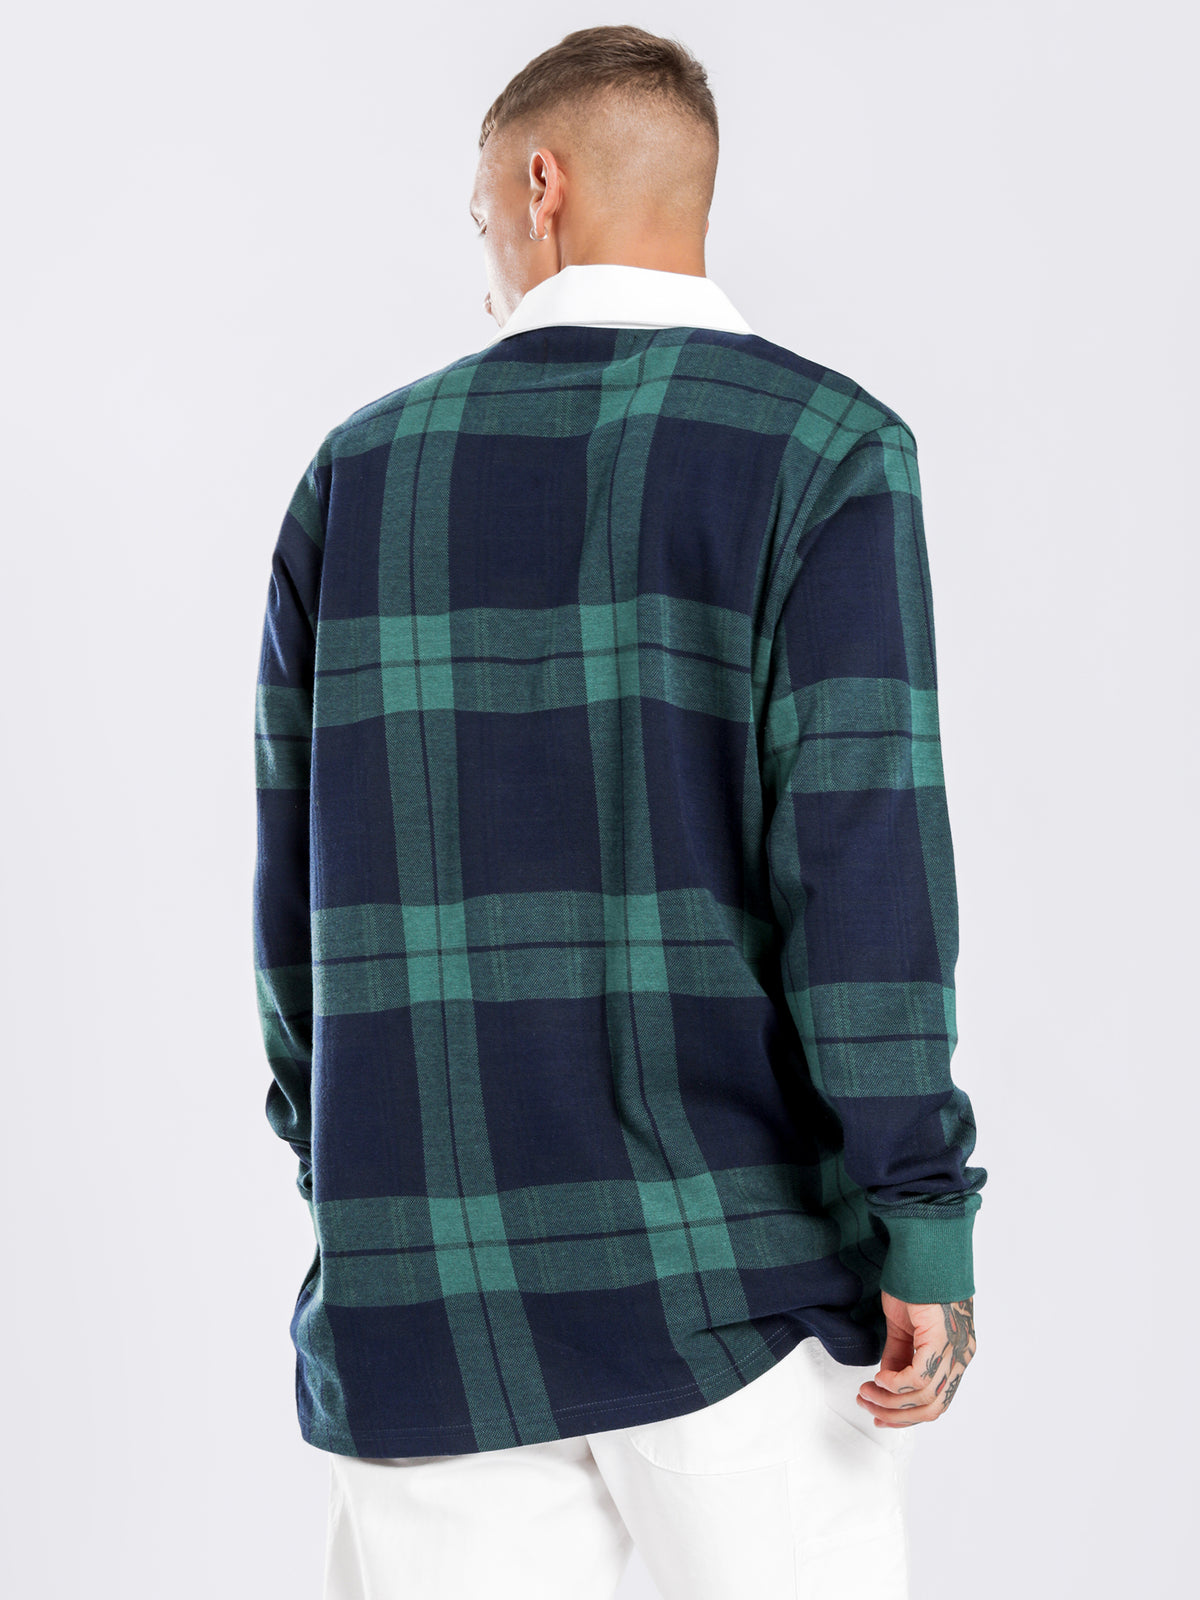 June Jacquard Rugby Shirt in Green